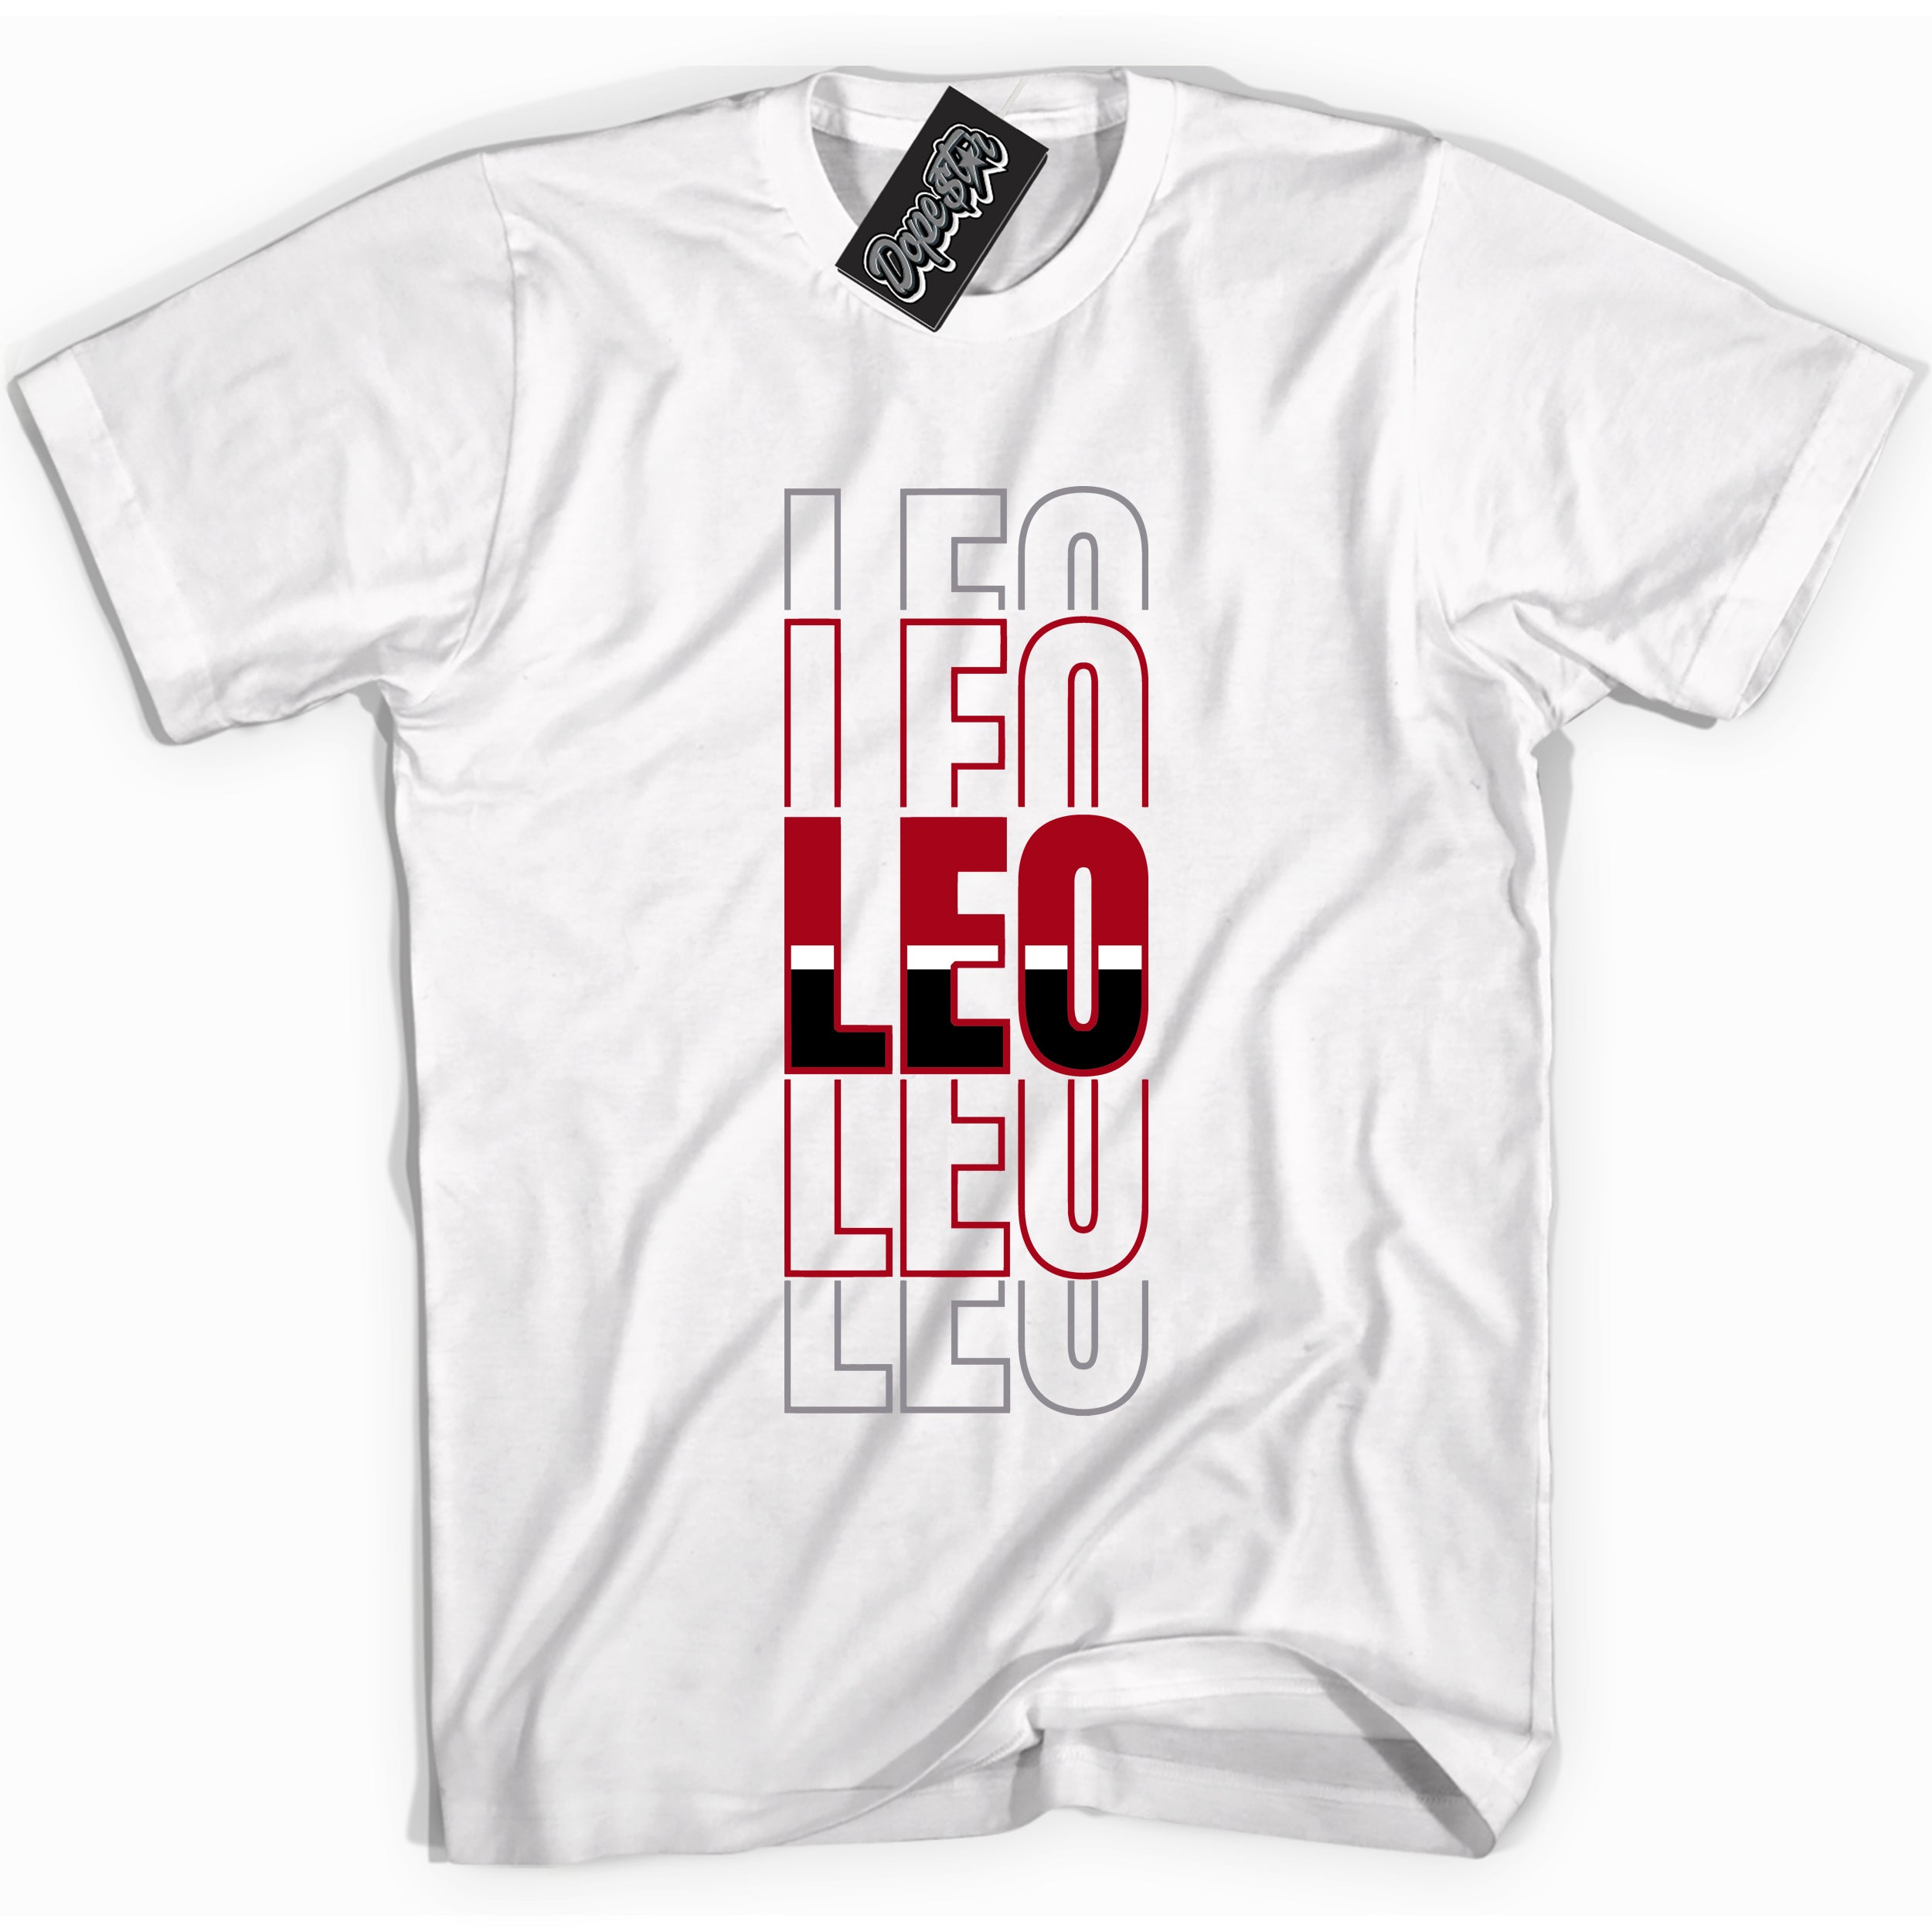 Cool White Shirt with “ Leo” design that perfectly matches Bred Reimagined 4s Jordans.